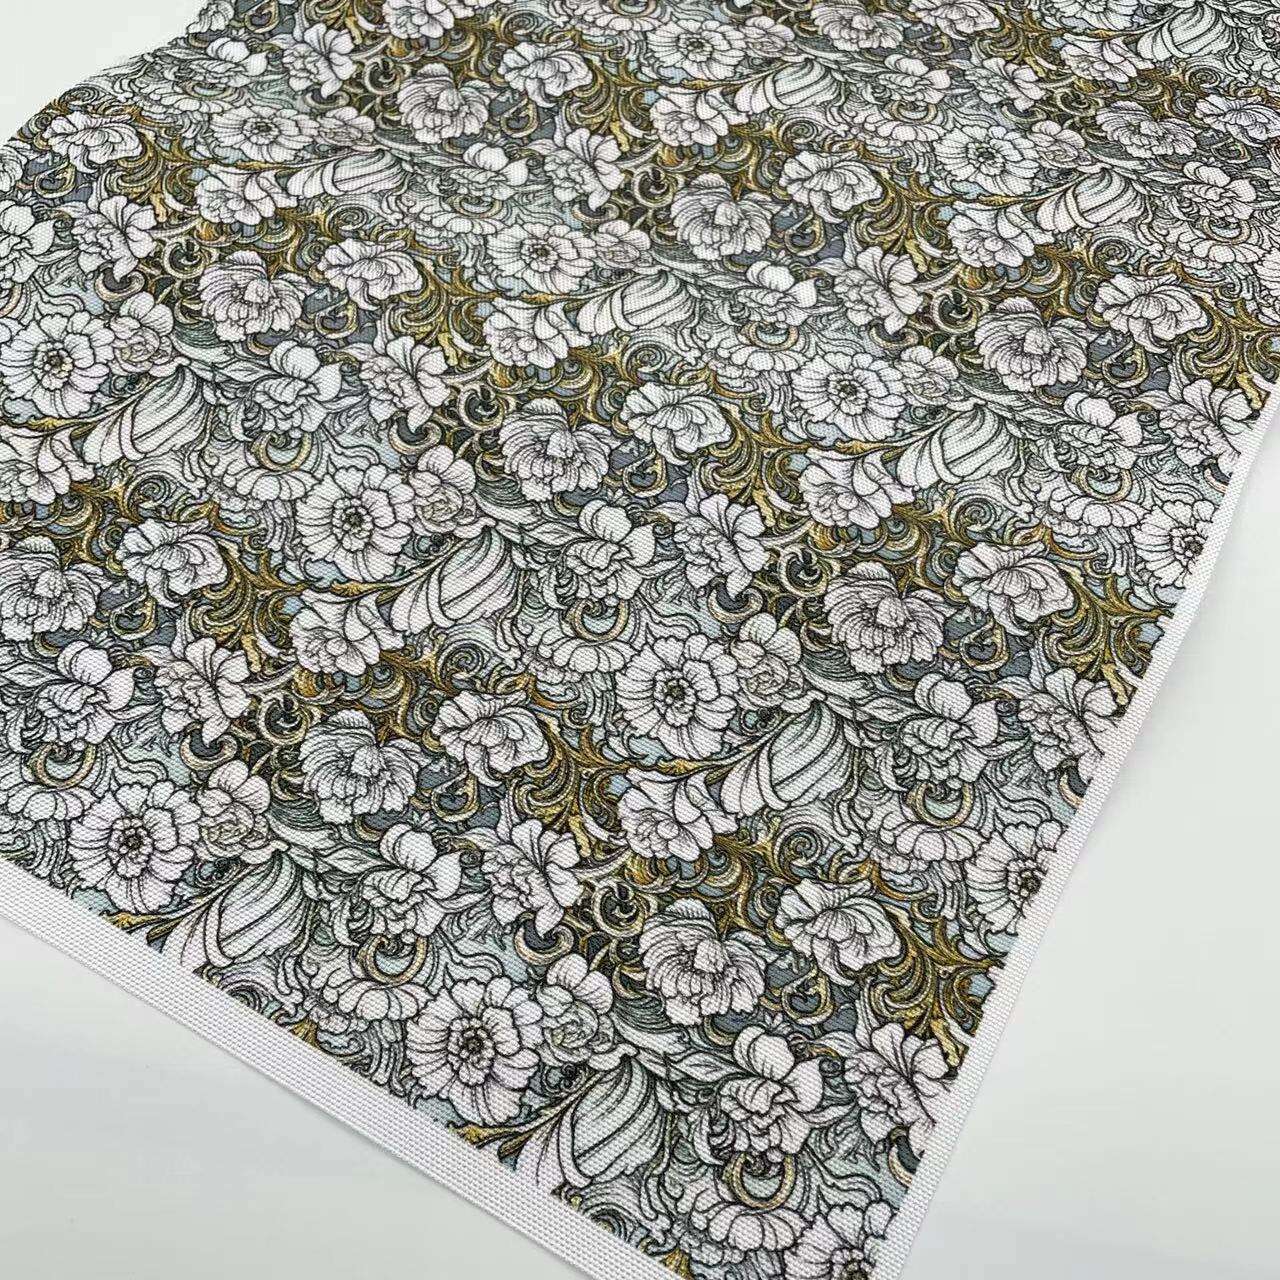 Printed 600D PU coated Polyester oxford fabric with durable water repellent